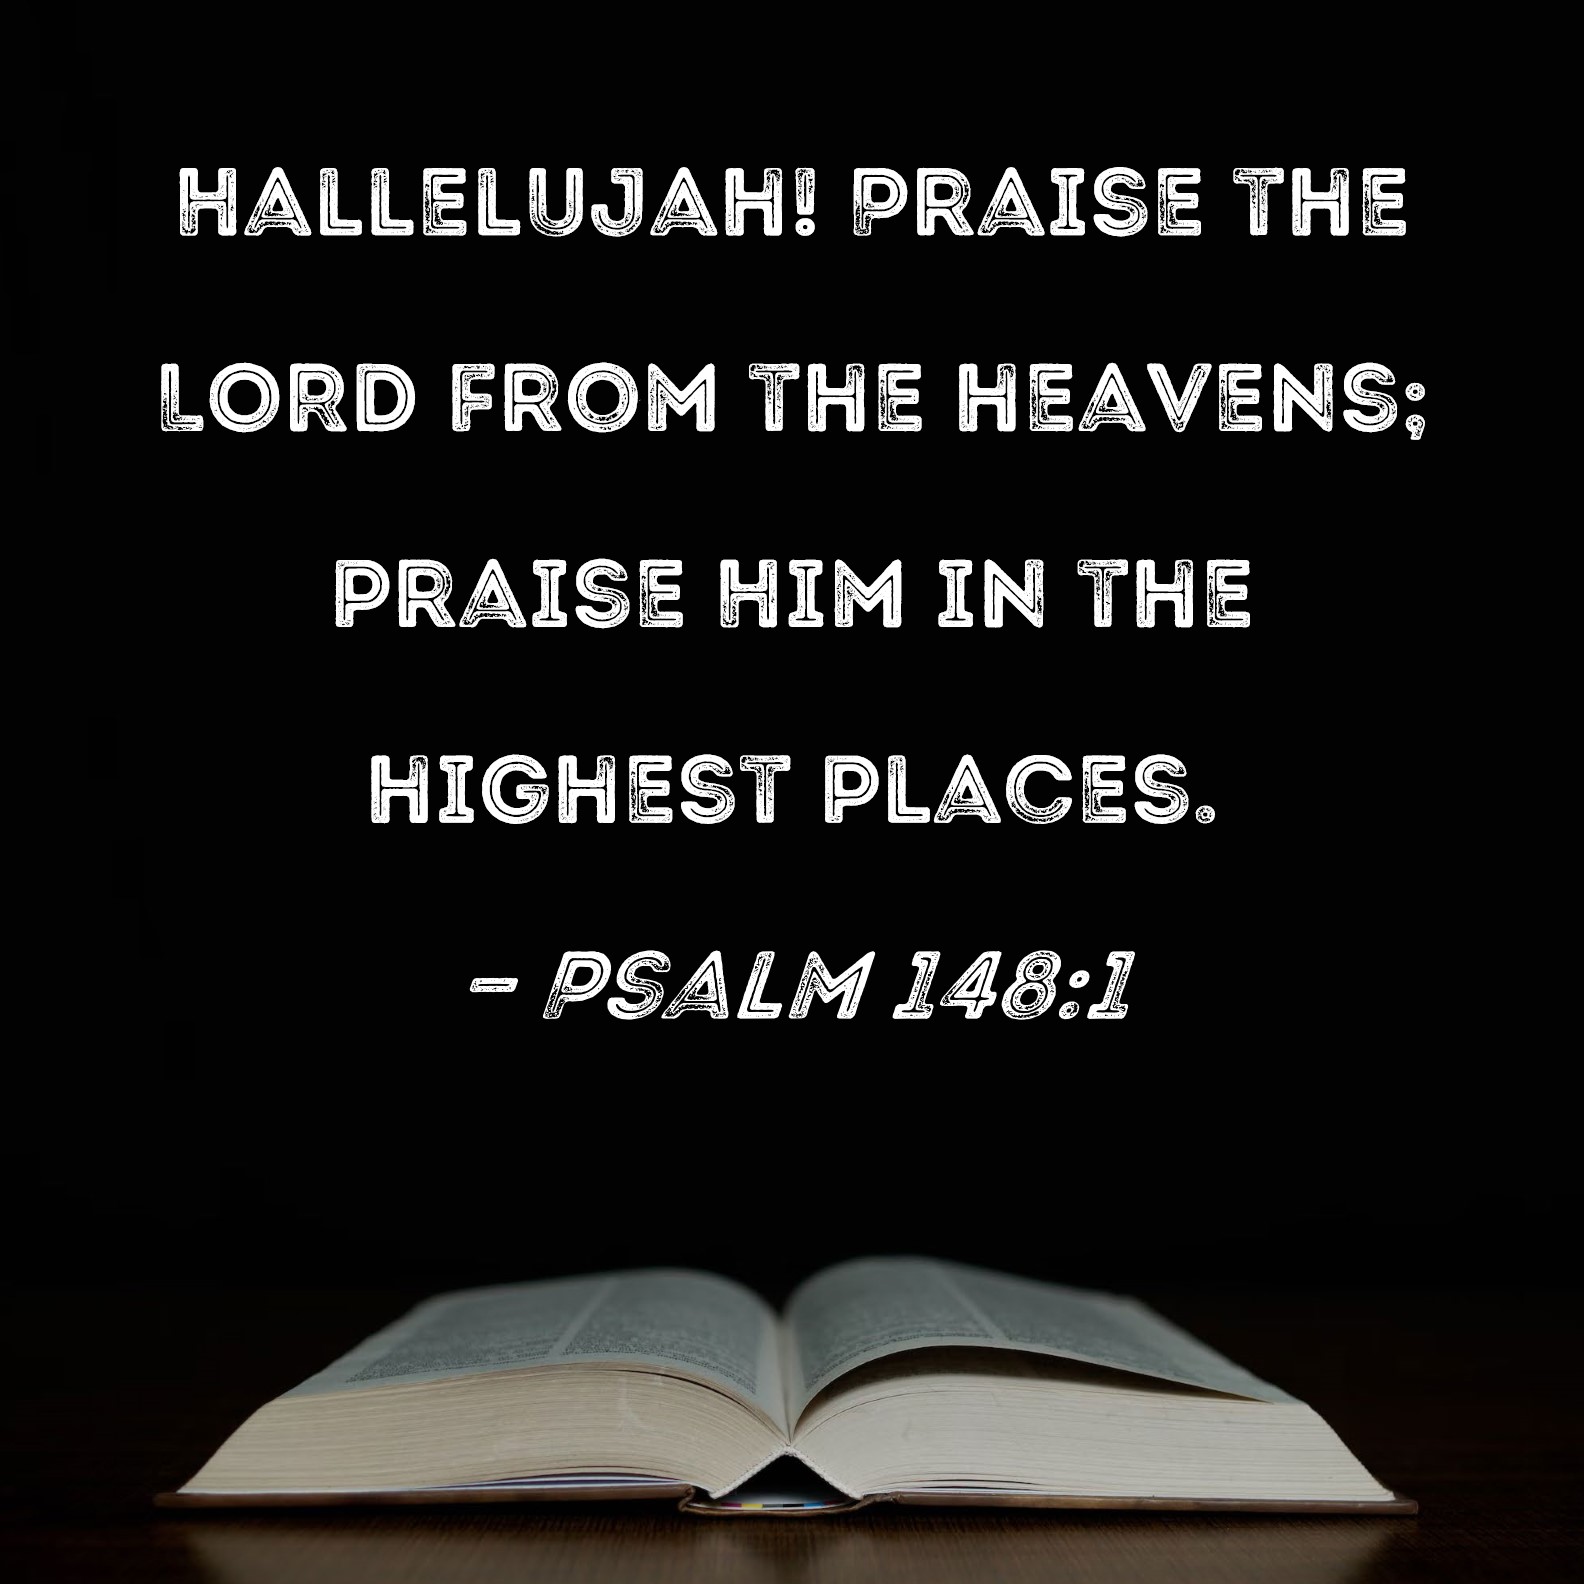 Psalm 148:1 Hallelujah Praise the LORD from the heavens praise Him in